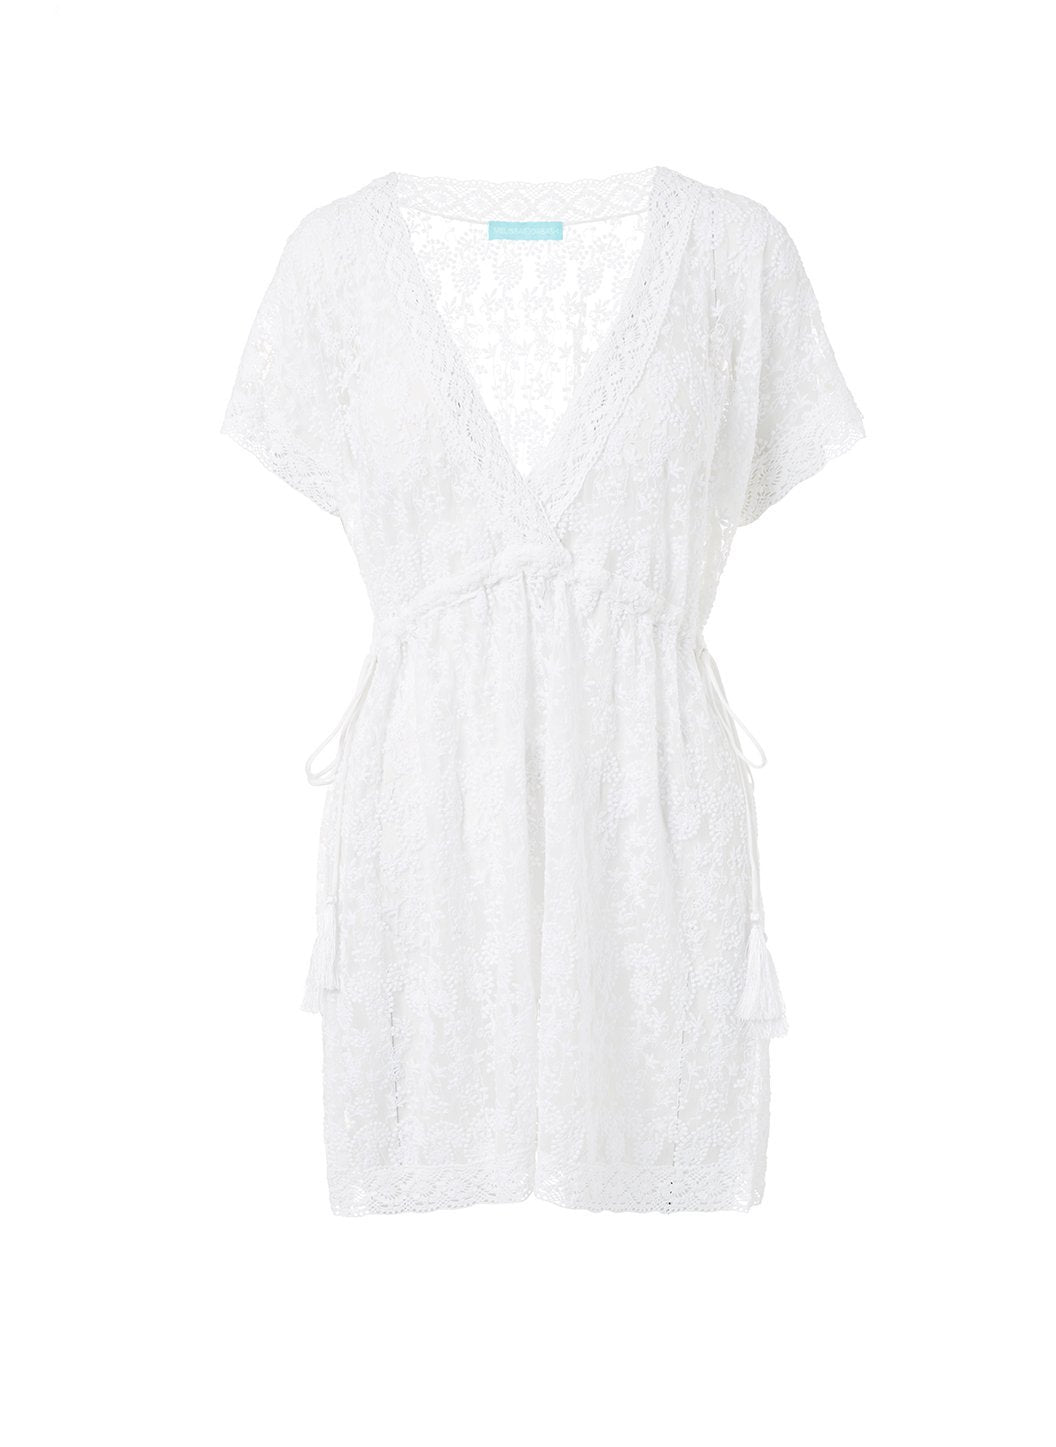 adelina white embroidered short tieside beach dress 2019